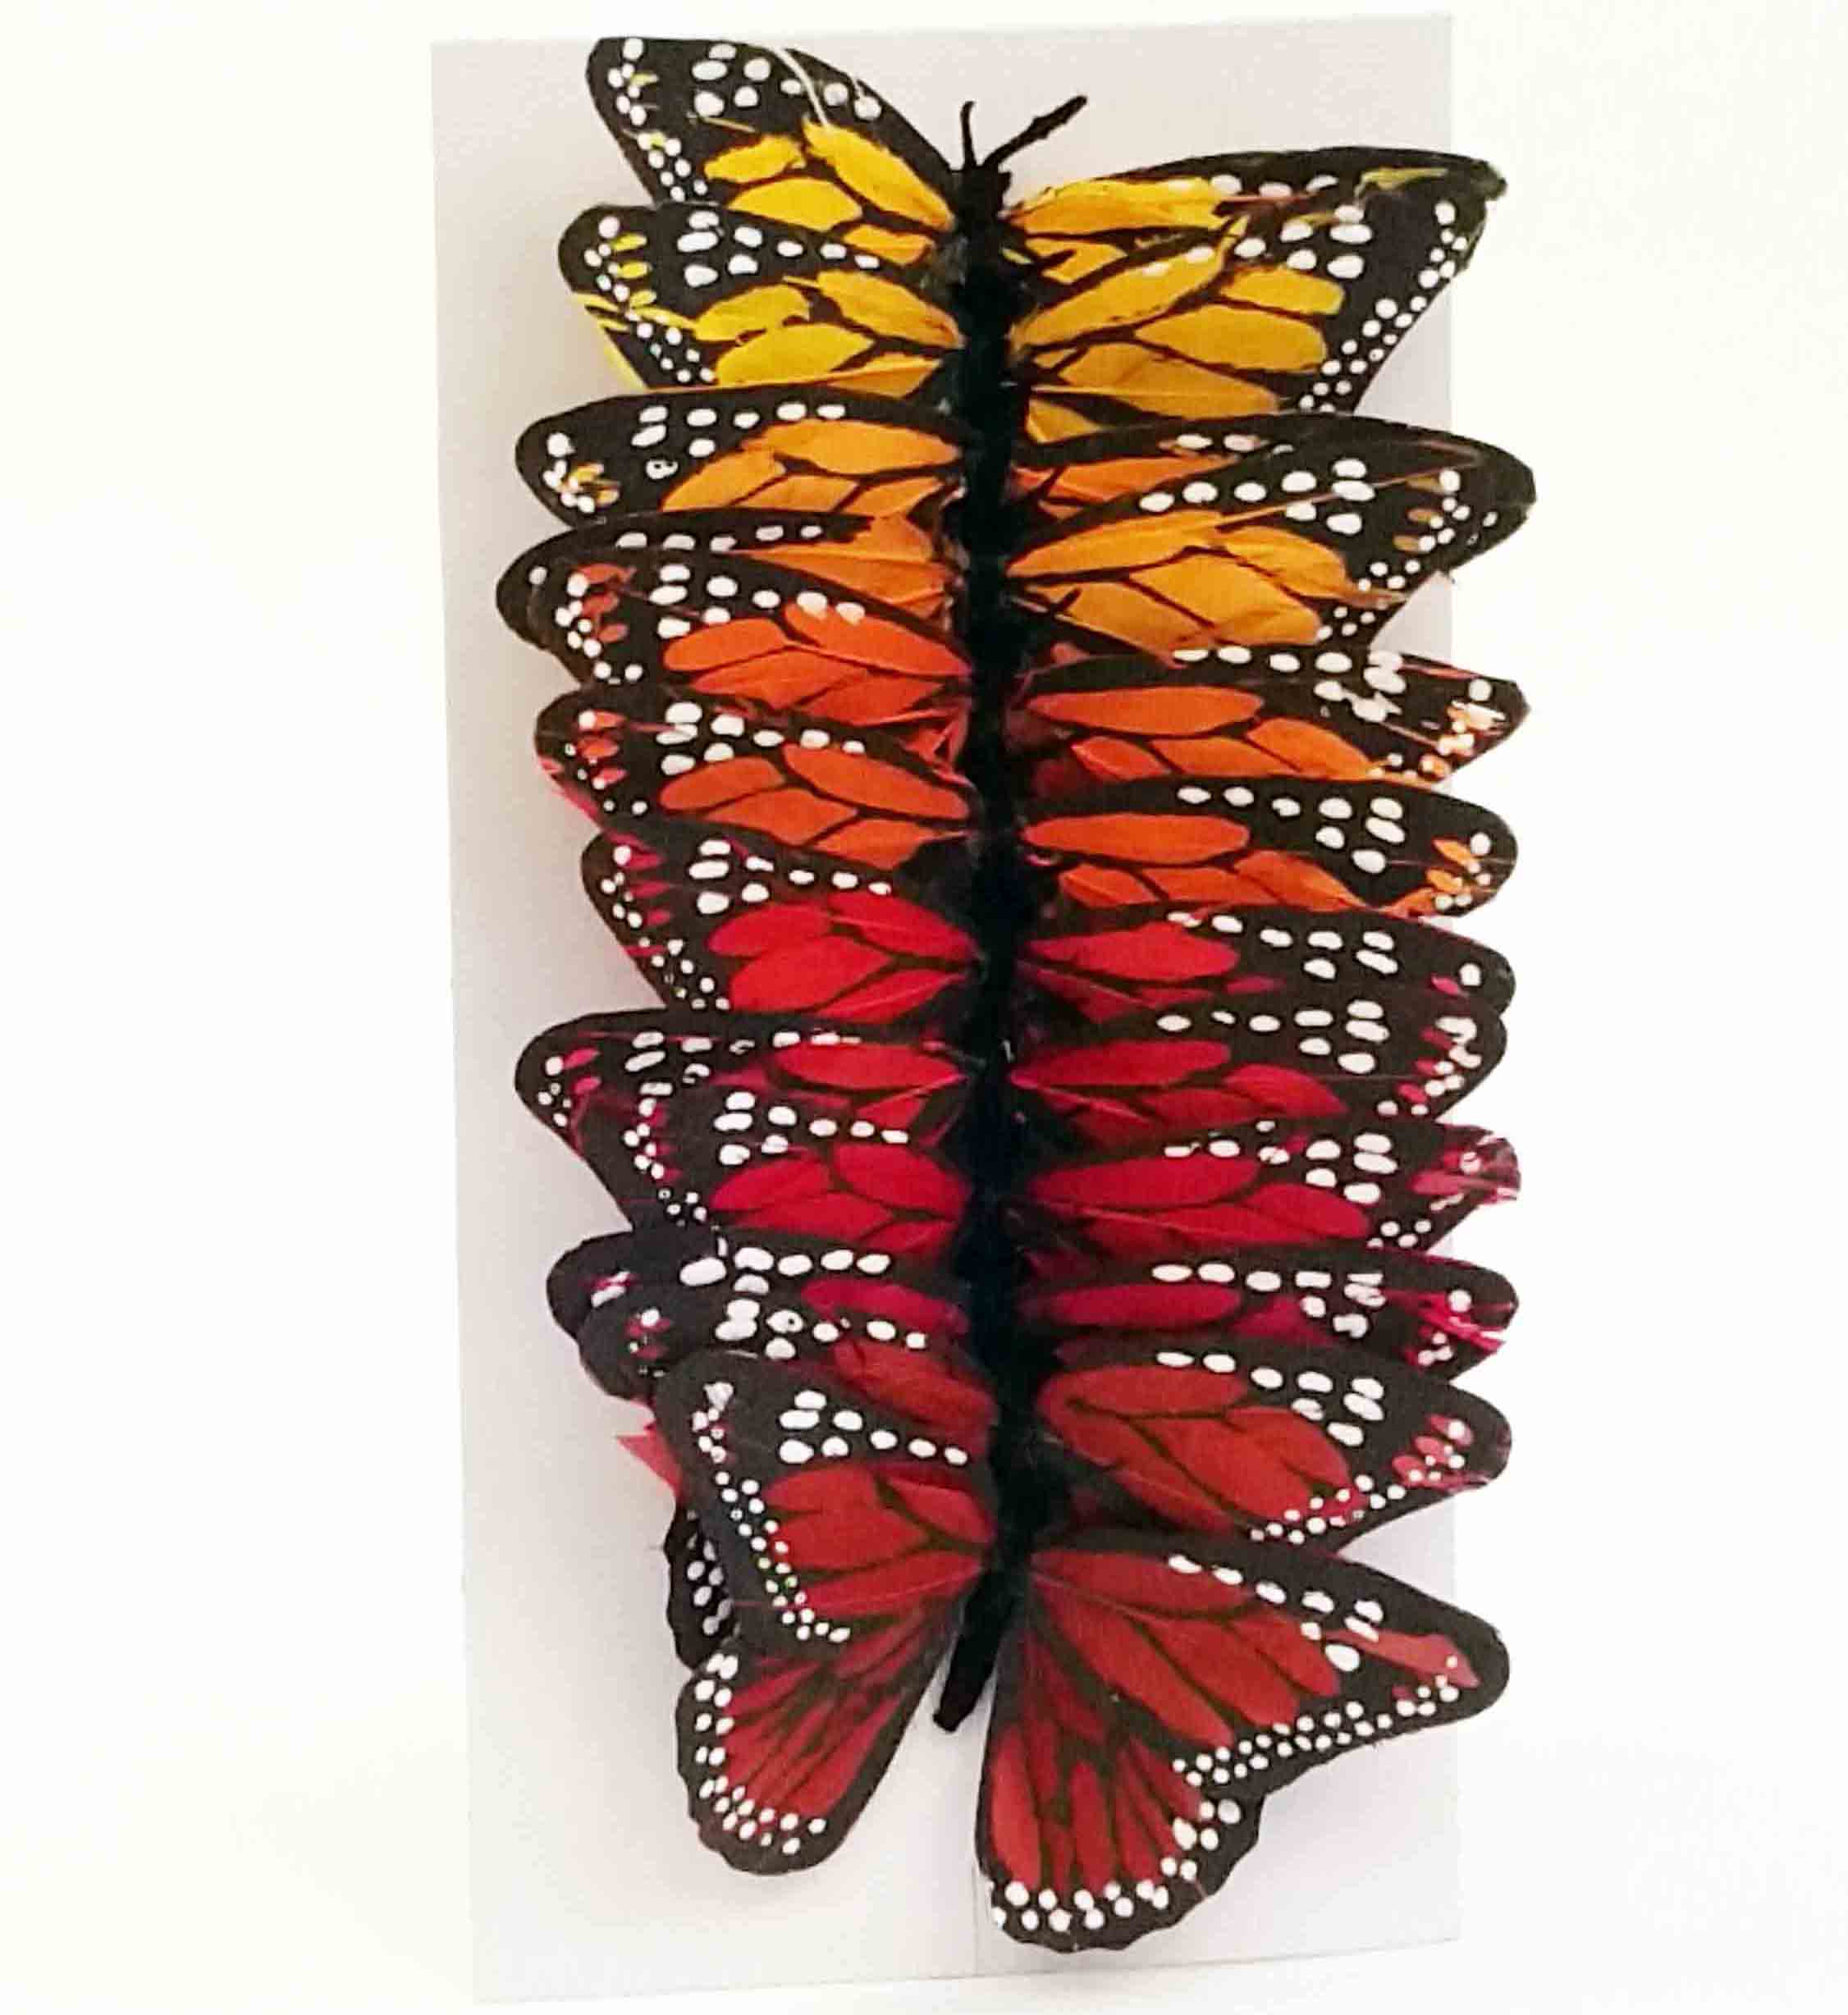 945 - 4.5" Monarch Butterfly - 21.60 box of 12